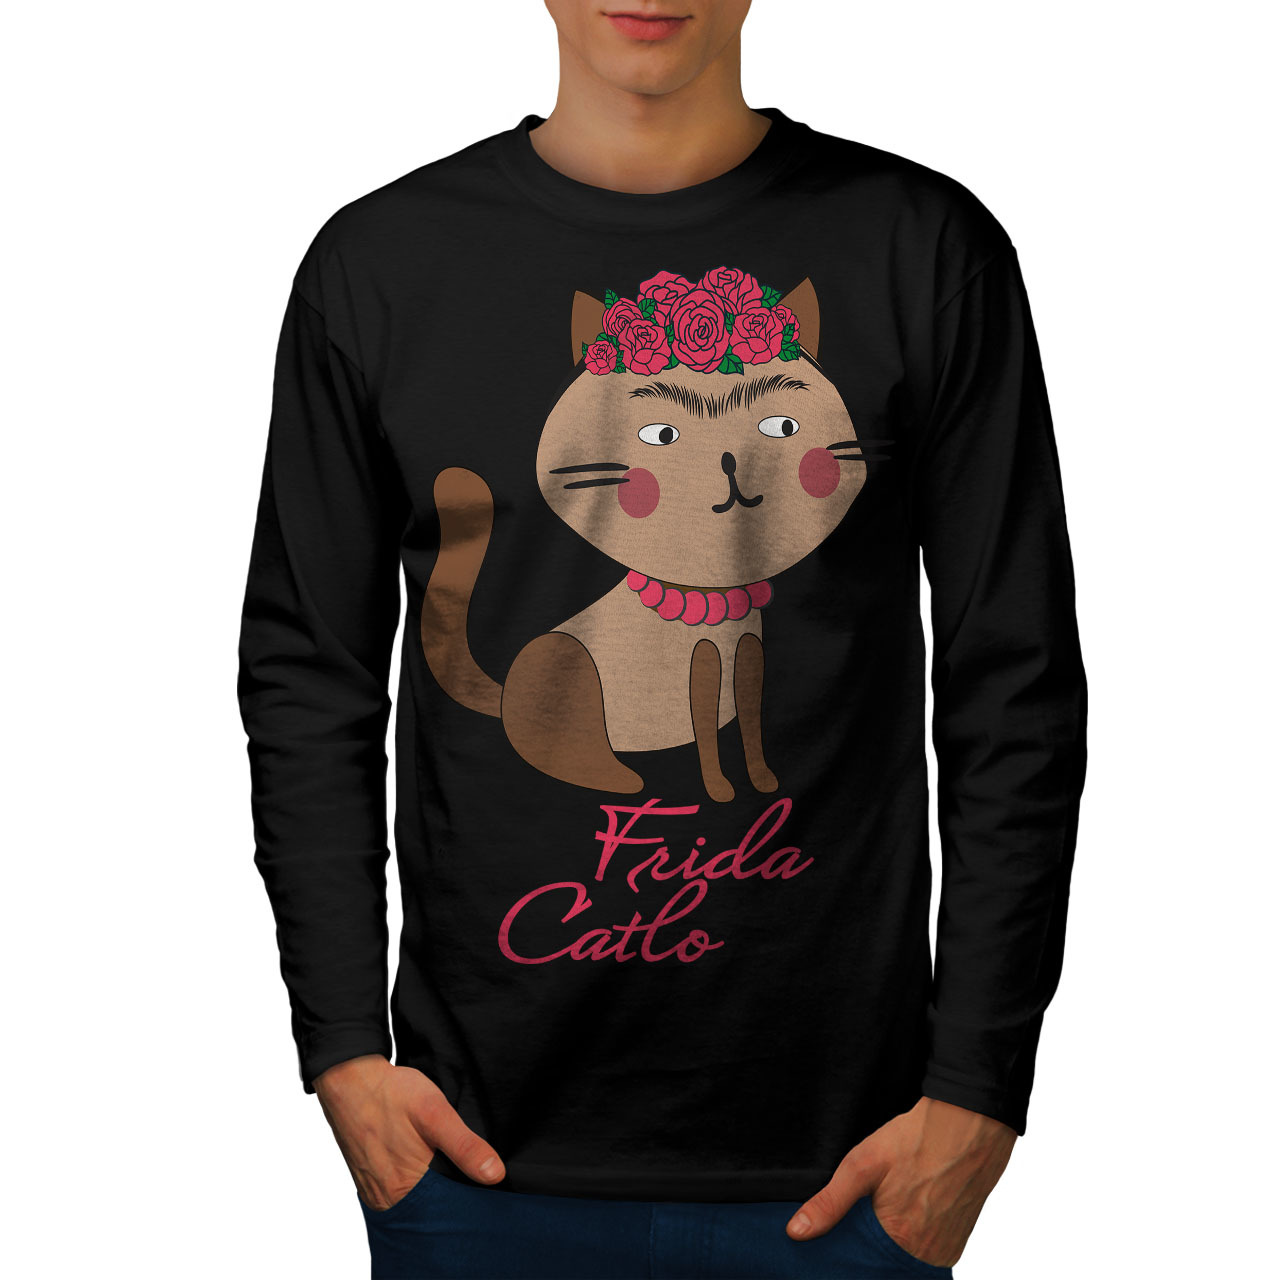 Primary image for Frida Kahlo Cat Tee Funny Men Long Sleeve T-shirt